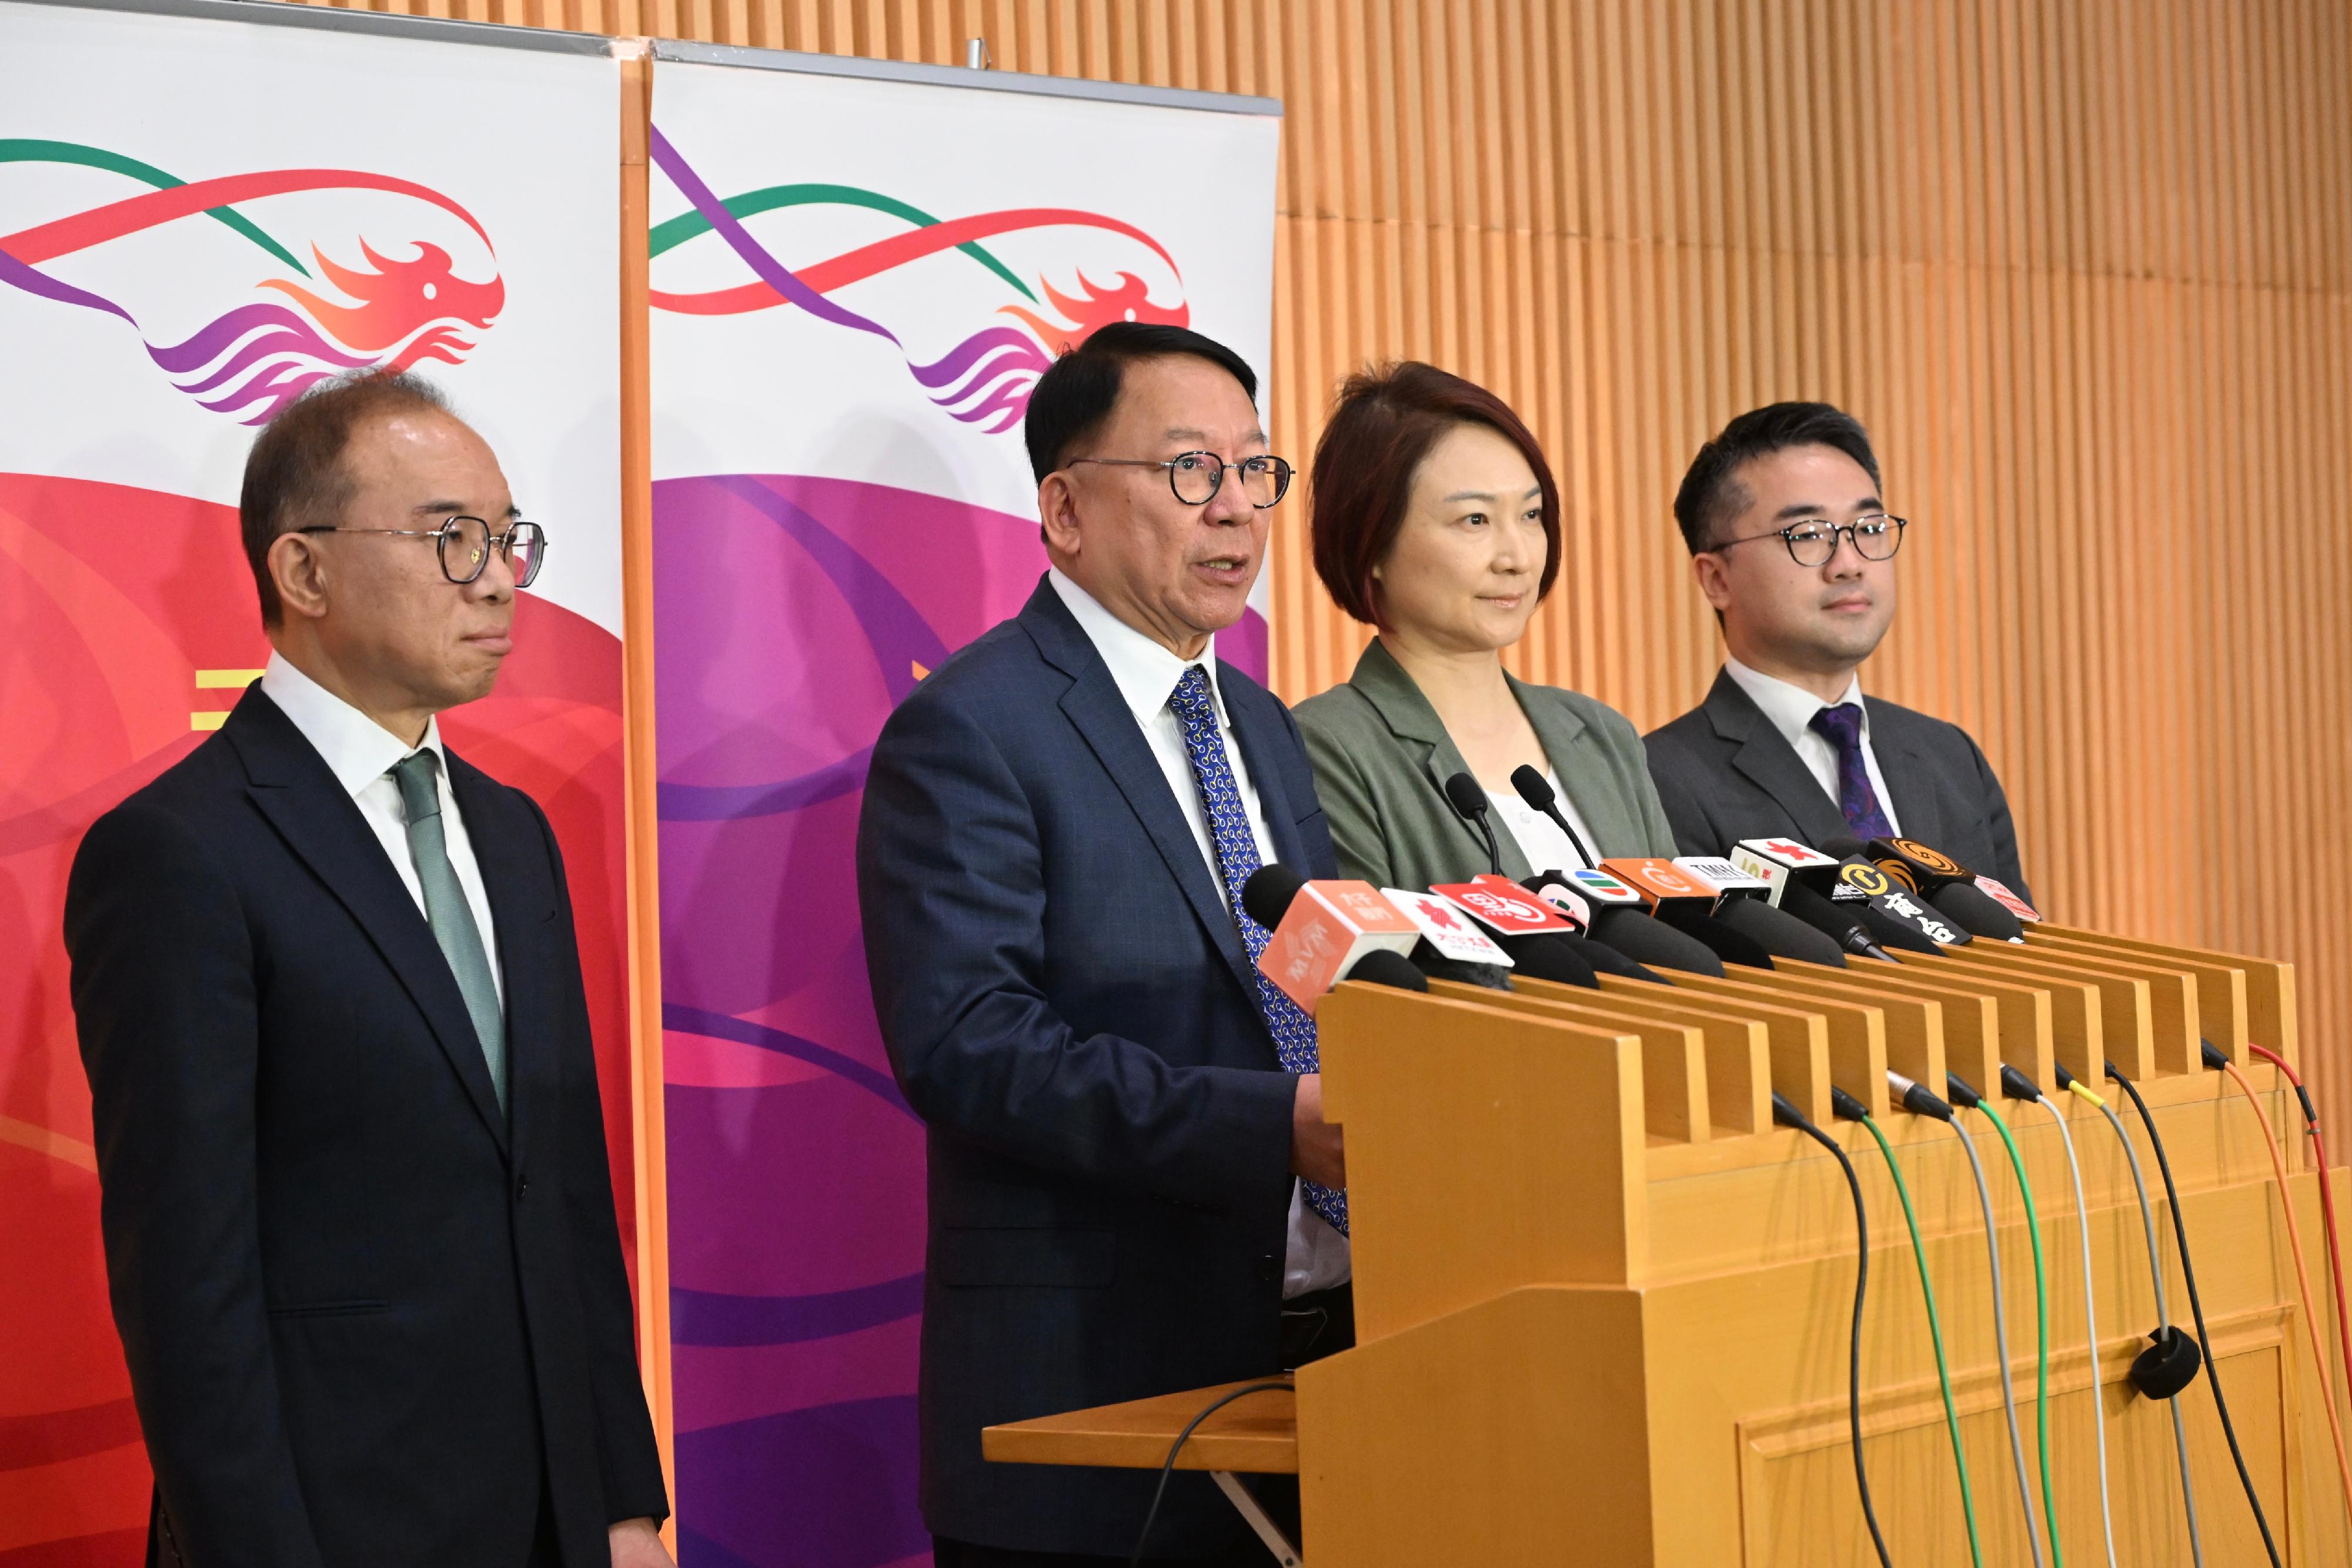 The Chief Secretary for Administration, Mr Chan Kwok-ki (second left), together with the Convenor of the Working Group on Patriotic Education, Ms Starry Lee (second right); the Secretary for Constitutional and Mainland Affairs, Mr Erick Tsang Kwok-wai (first left); and the Acting Secretary for Education, Mr Sze Chun-fai (first right), meet the media after the first meeting of the Working Group on Patriotic Education under the Constitution and Basic Law Promotion Steering Committee this morning (April 29).